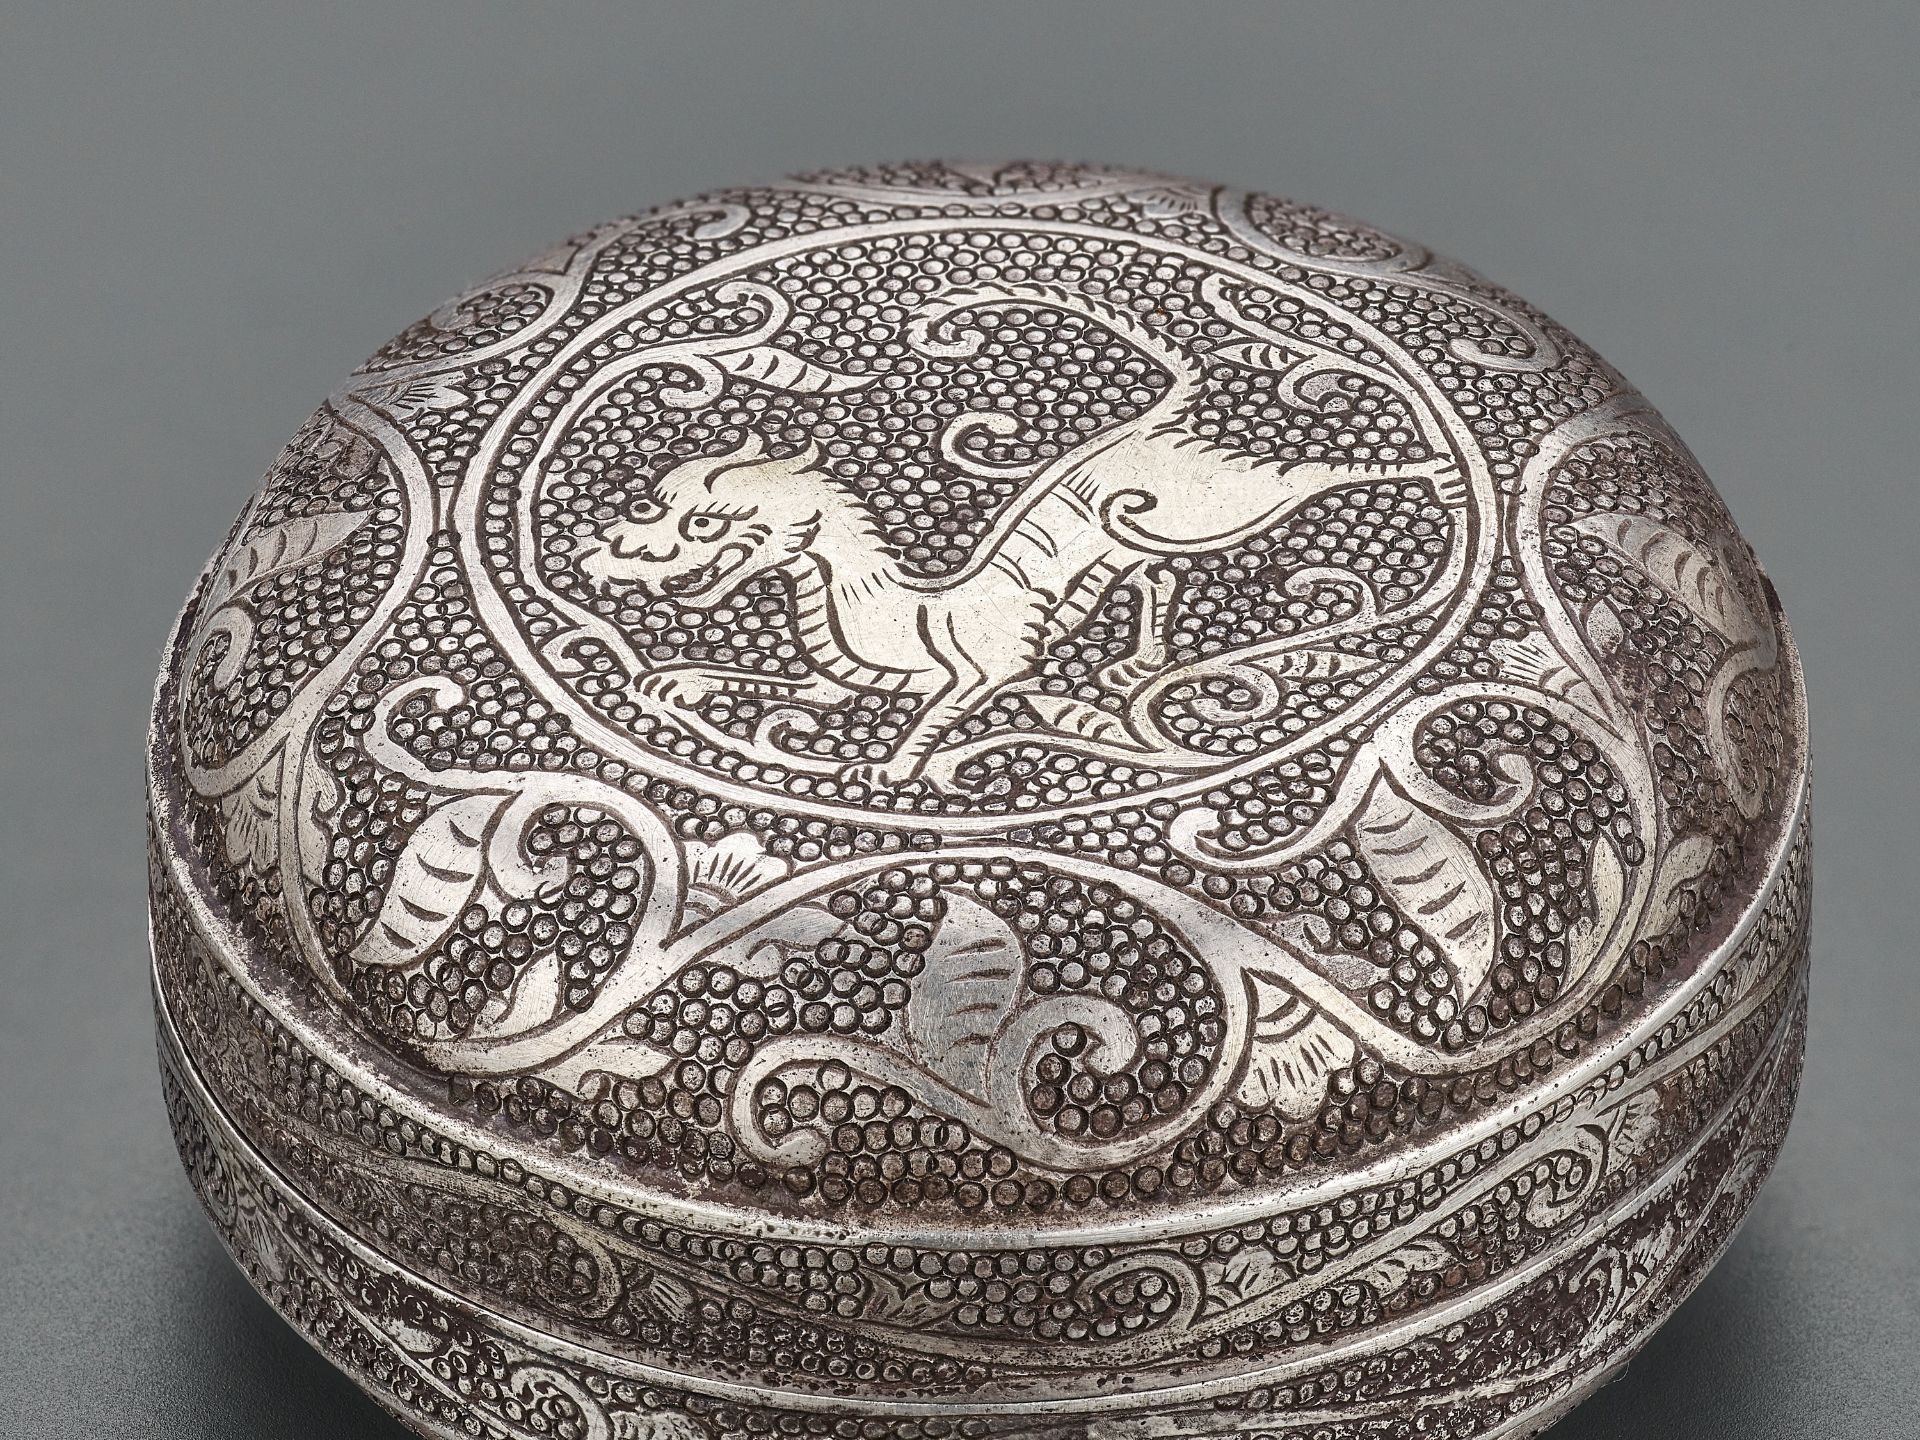 A 'MANDARIN DUCK' SILVER BOX AND COVER, TANG DYNASTY - Image 15 of 19